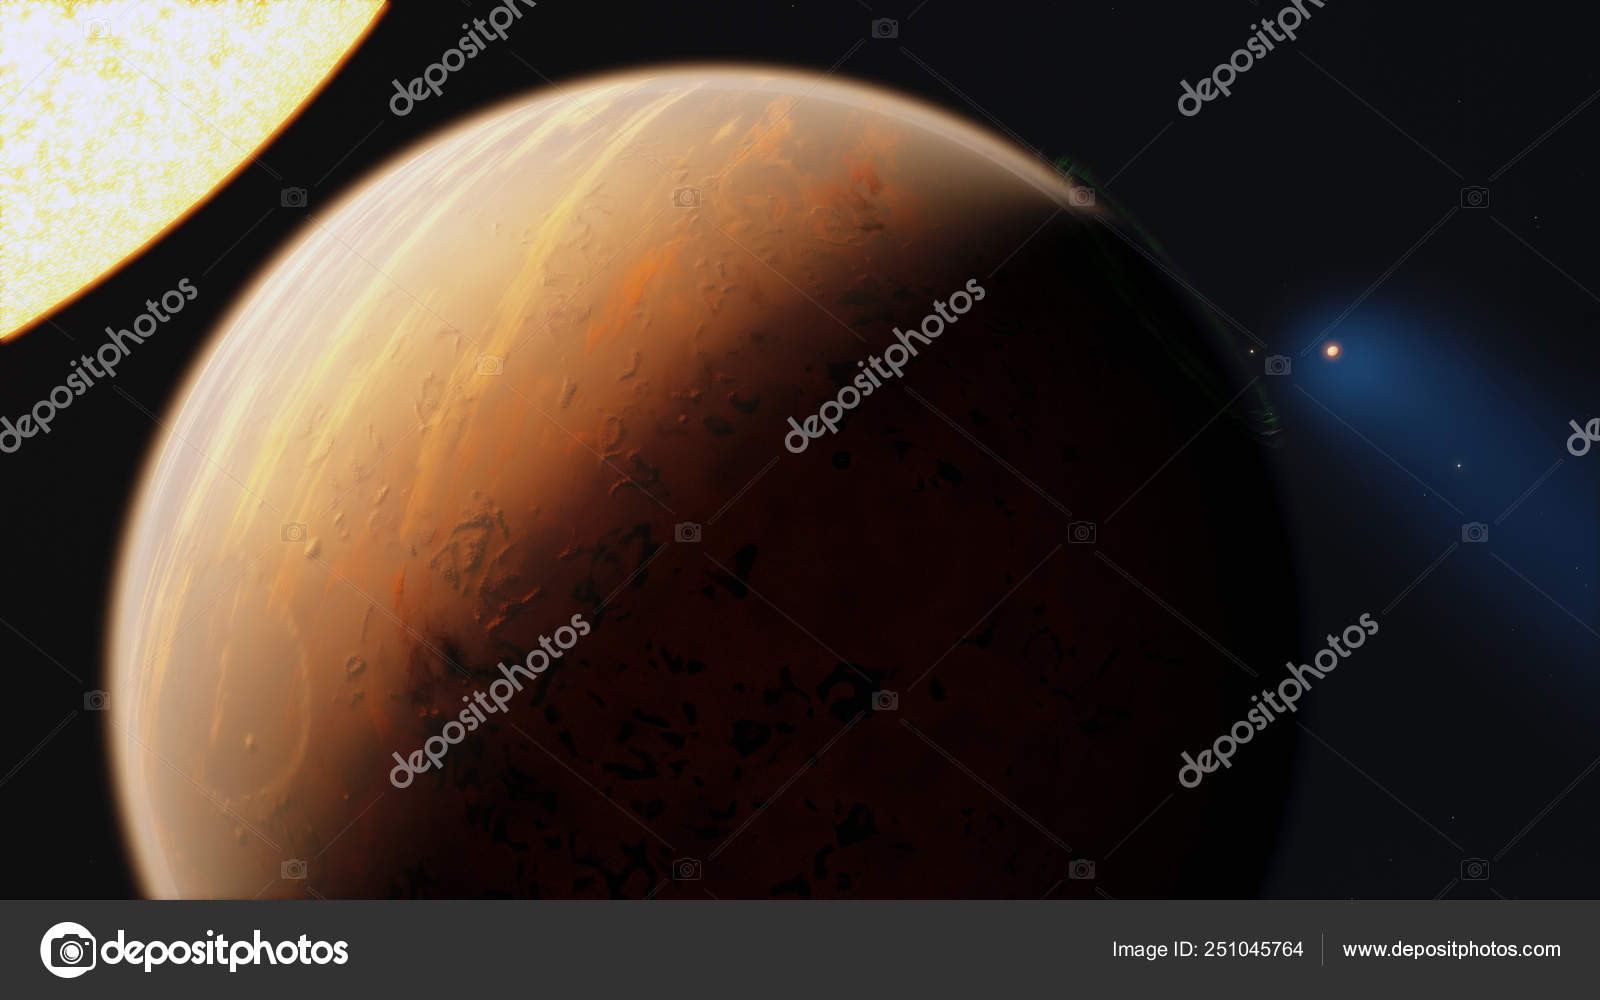 space wallpaper 4k,planet,astronomical object,atmosphere,earth,close up